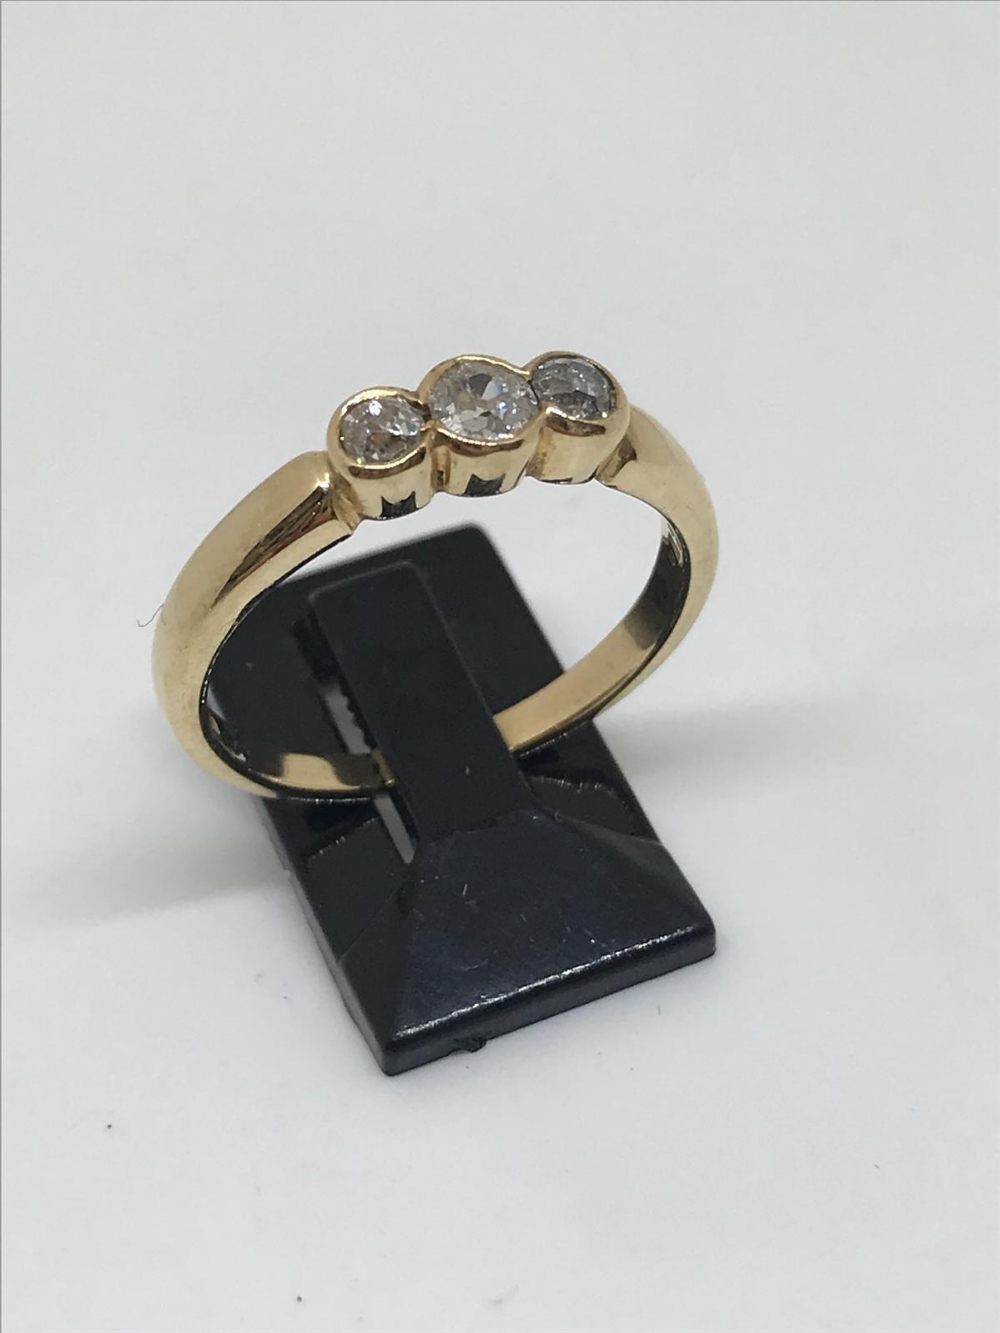 9ct gold and diamond ring - Image 2 of 2